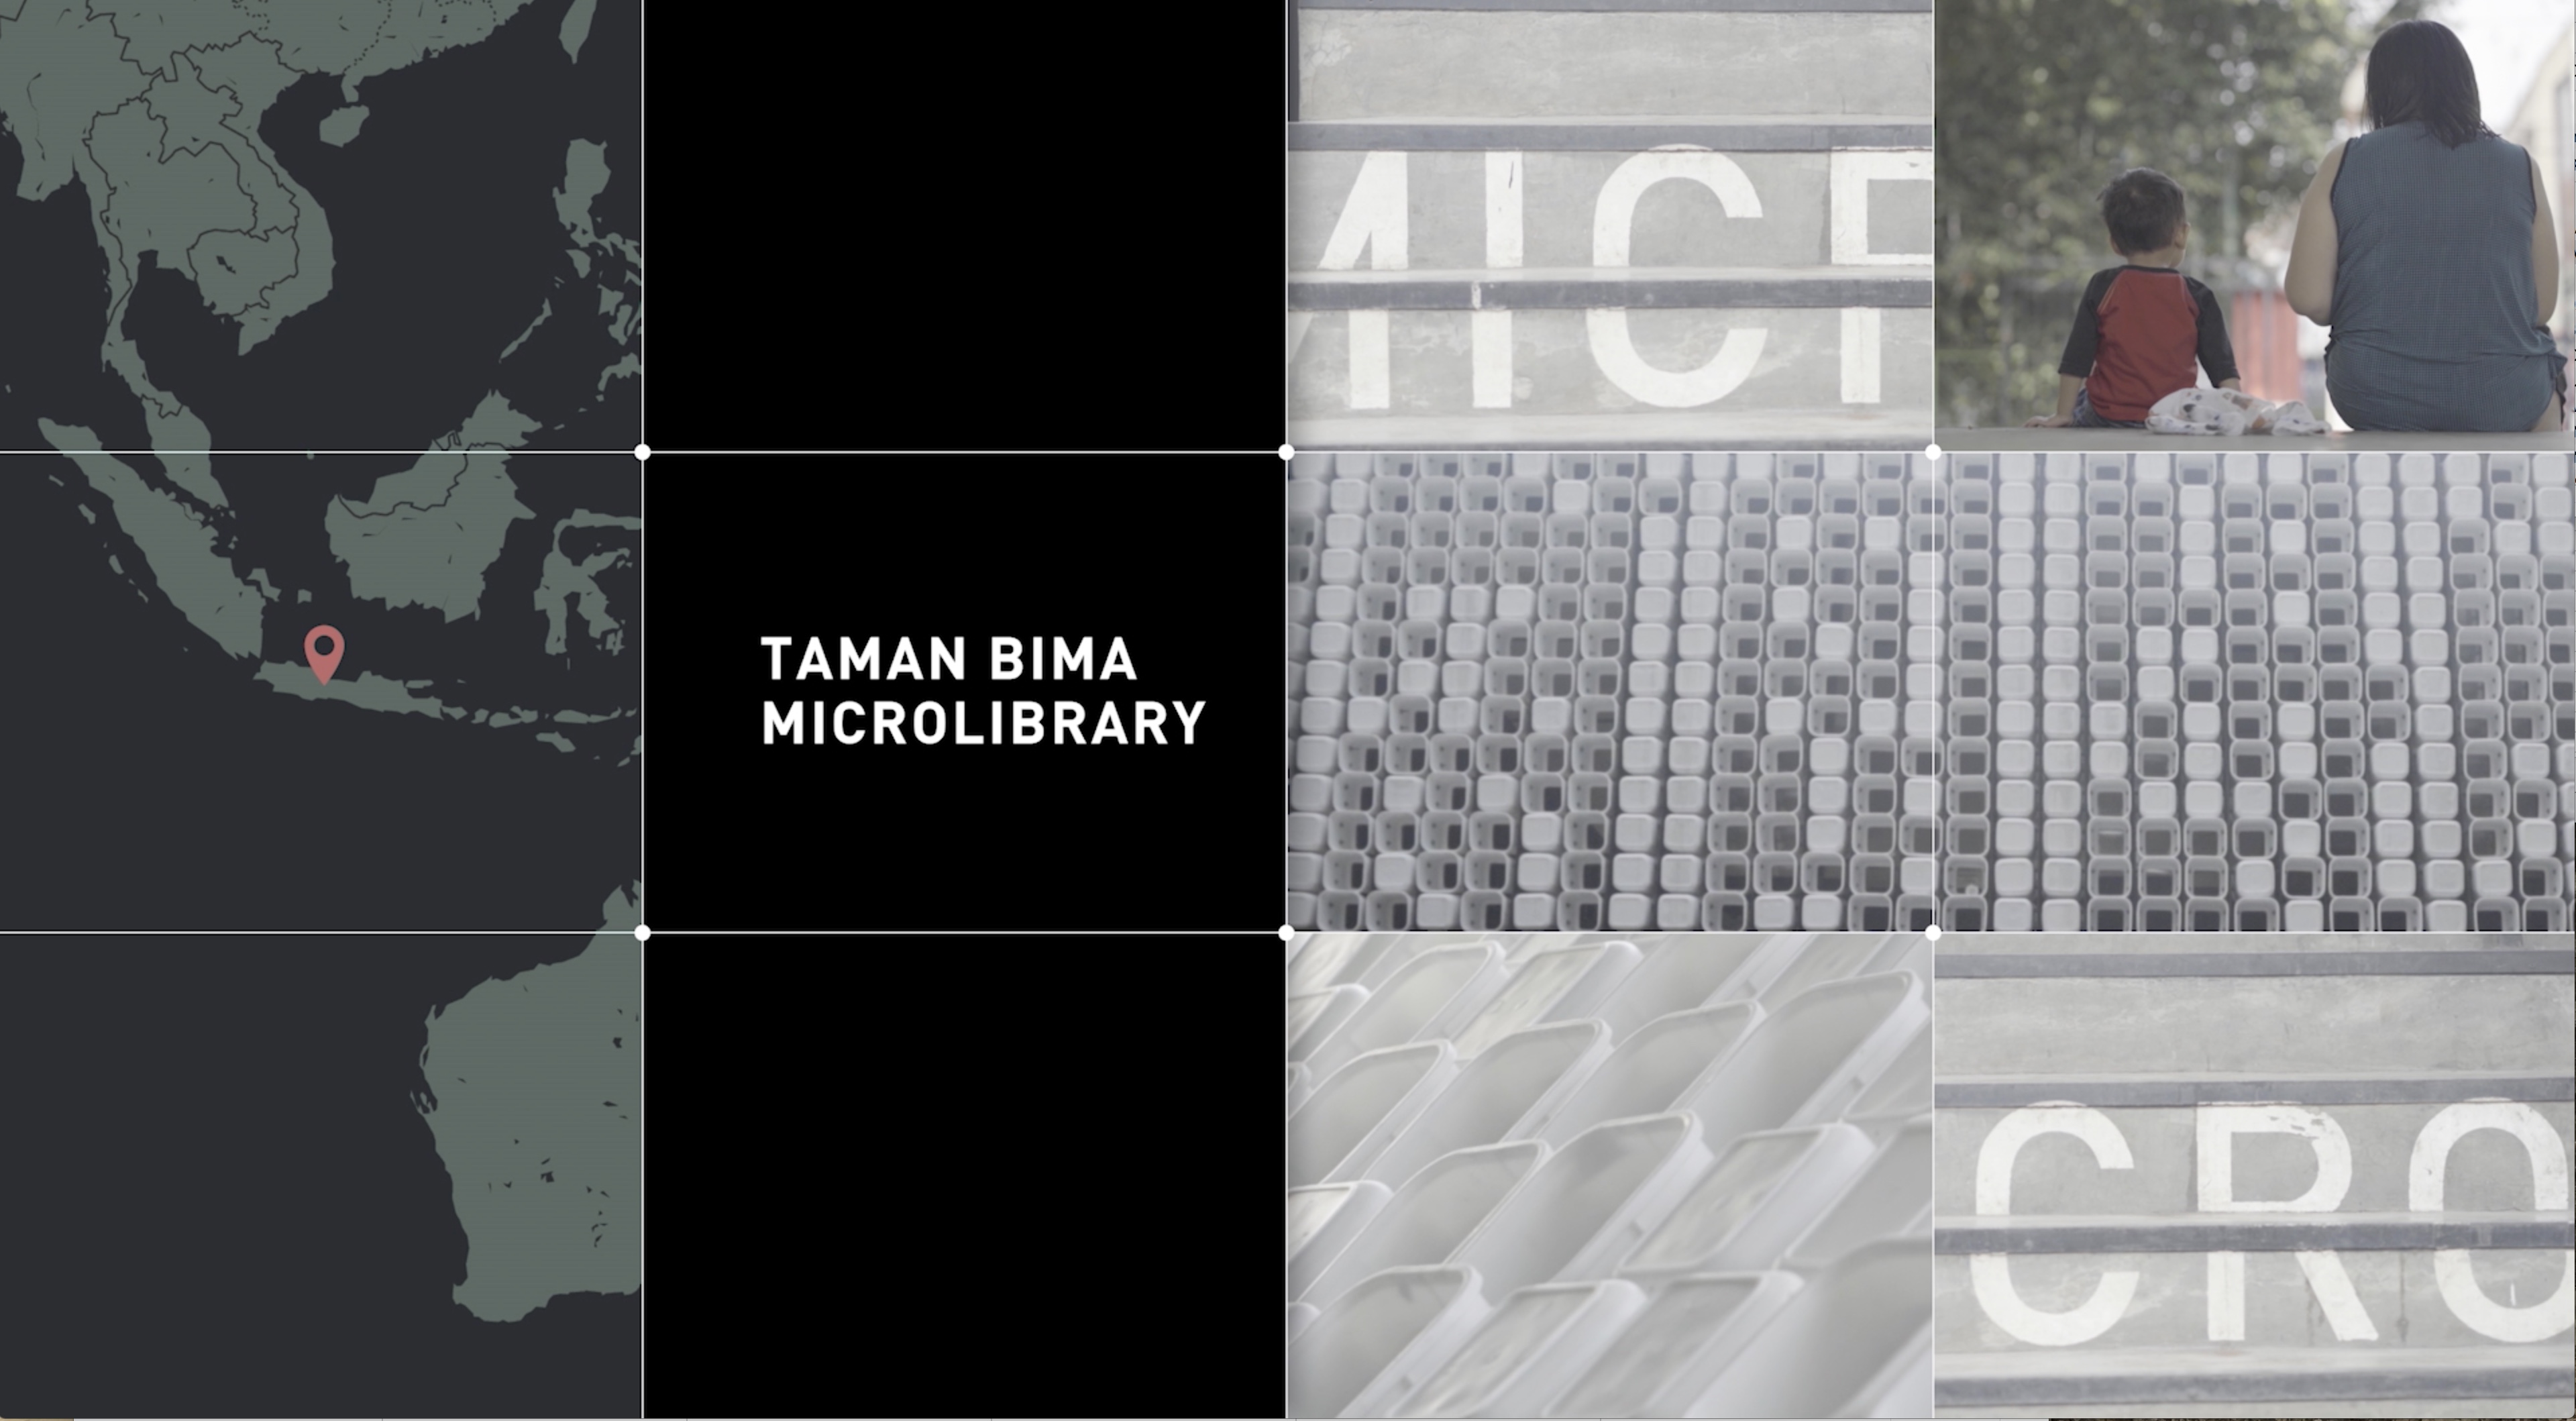 Video Introduction to the Taman Bima Microlibrary